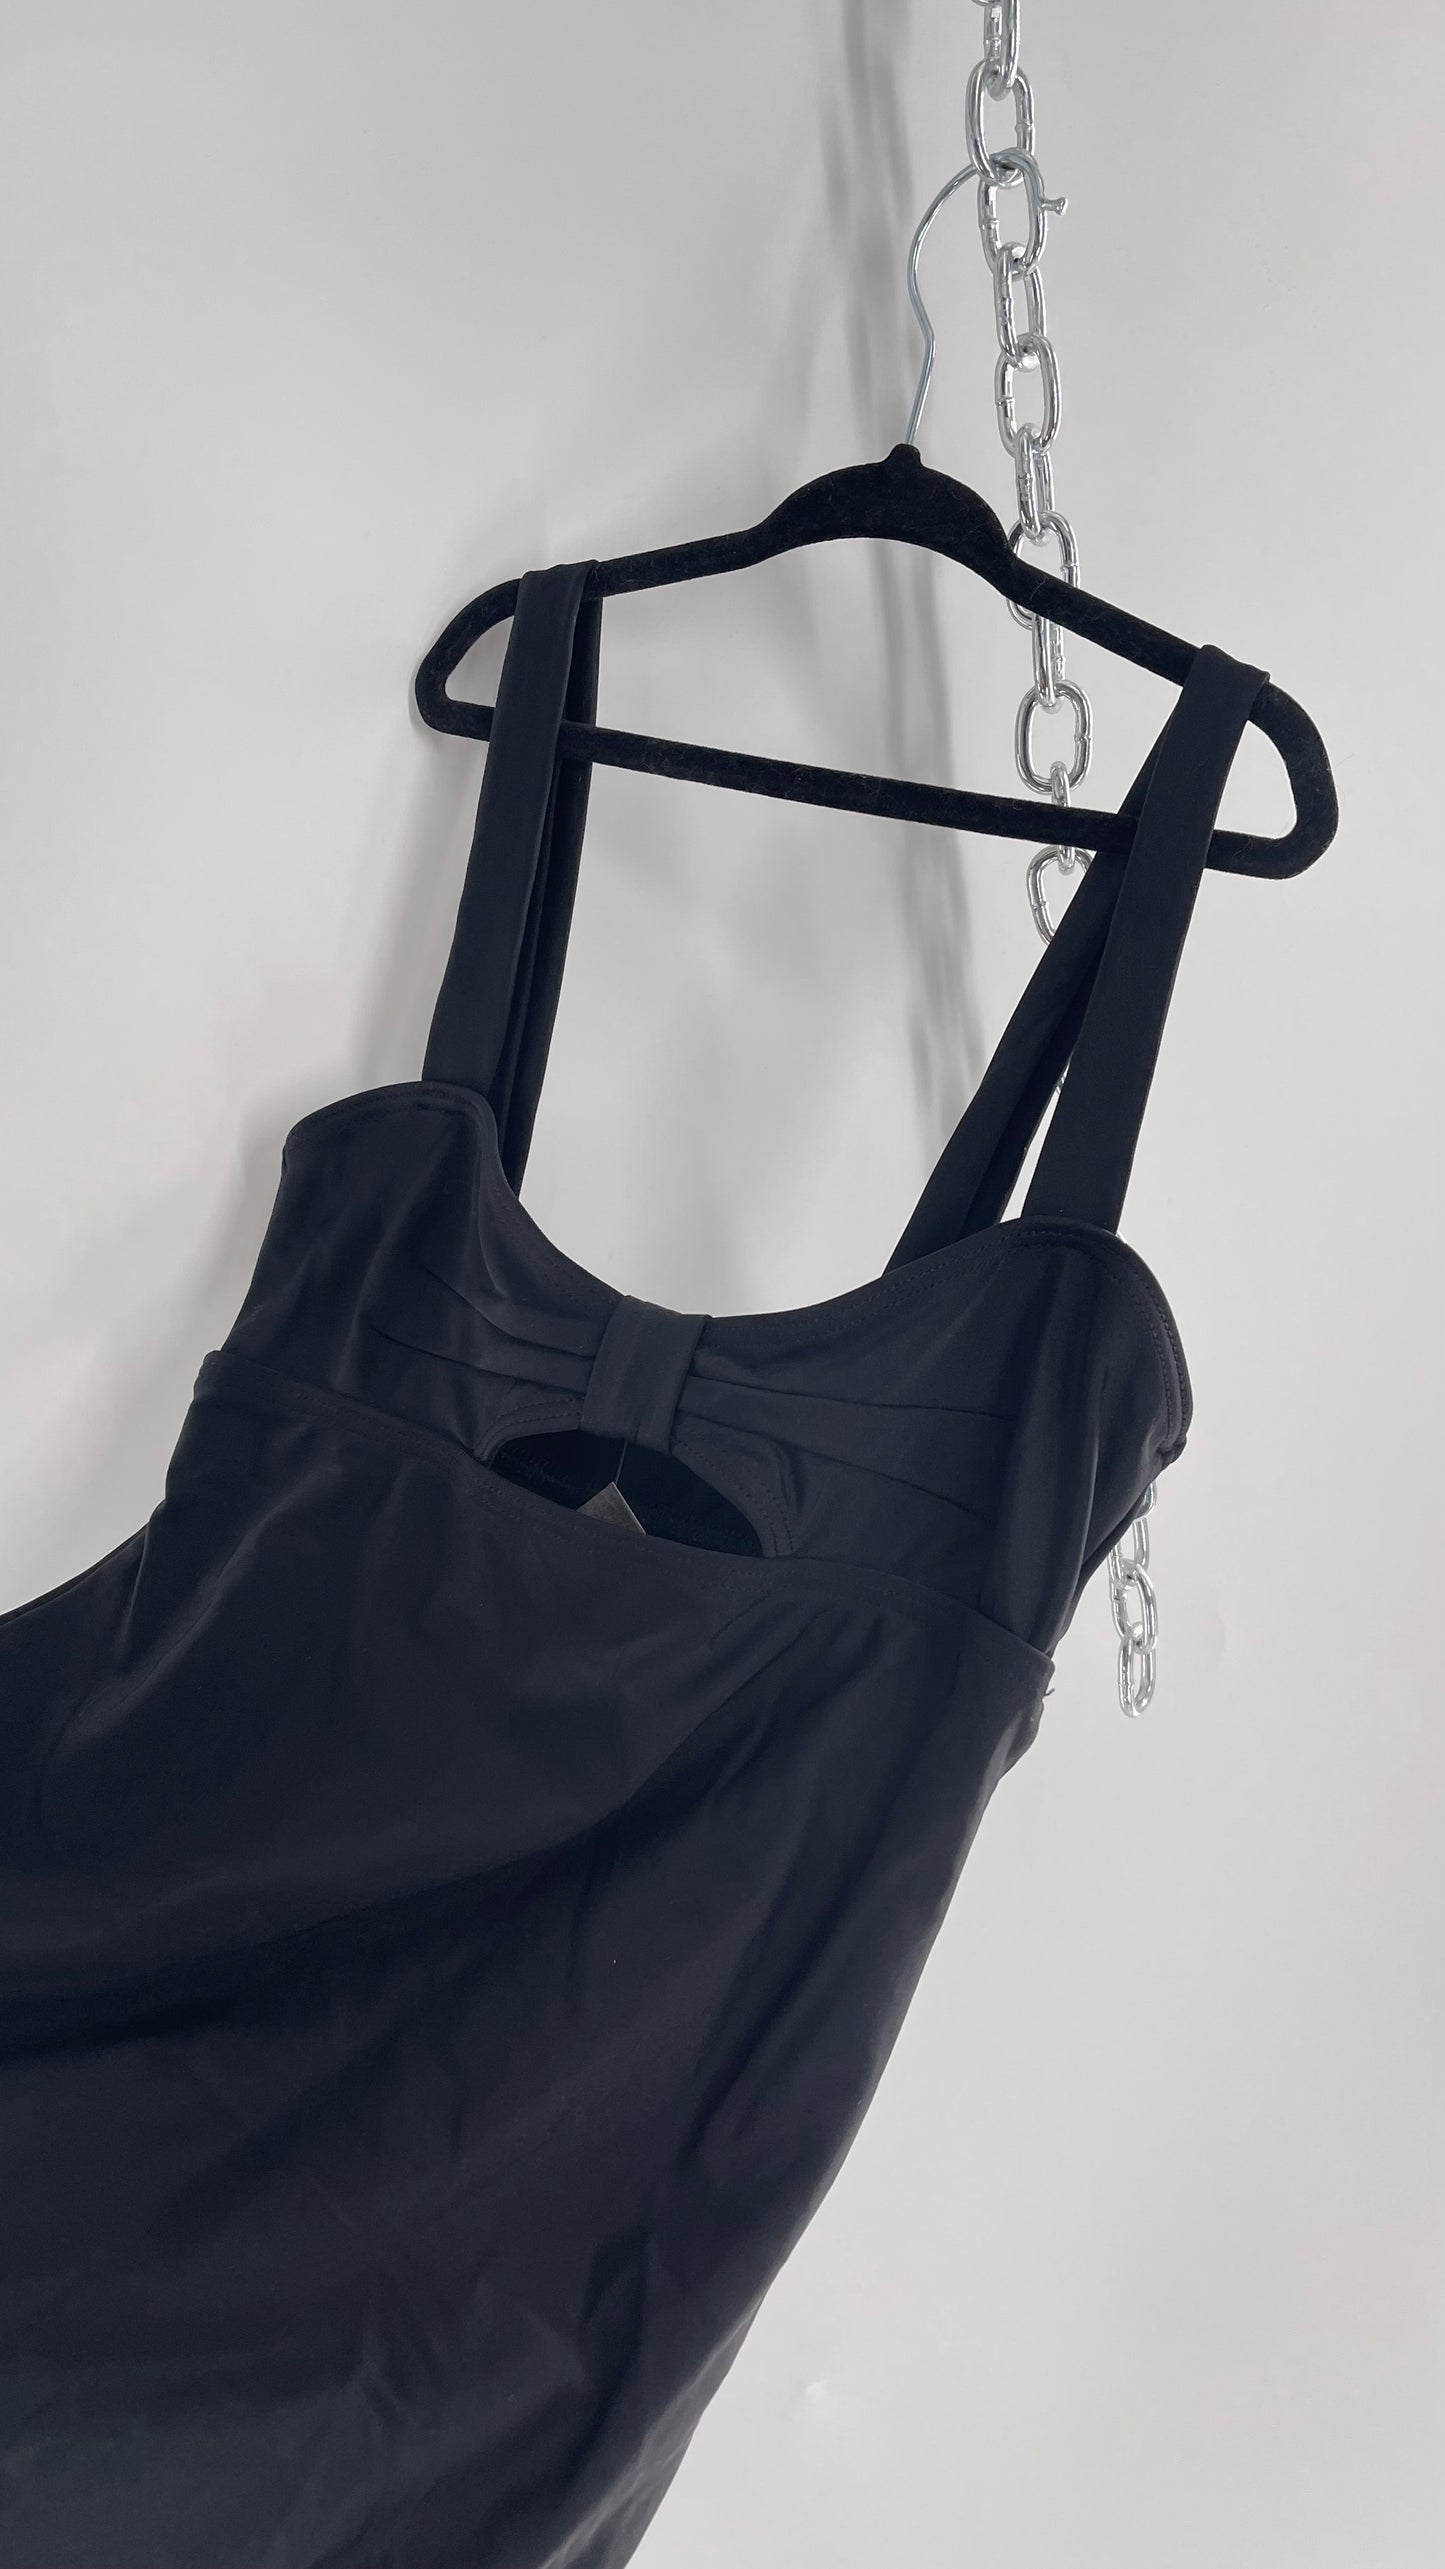 Yes Master x Free People Black Bow Bust Swimsuit (Small)